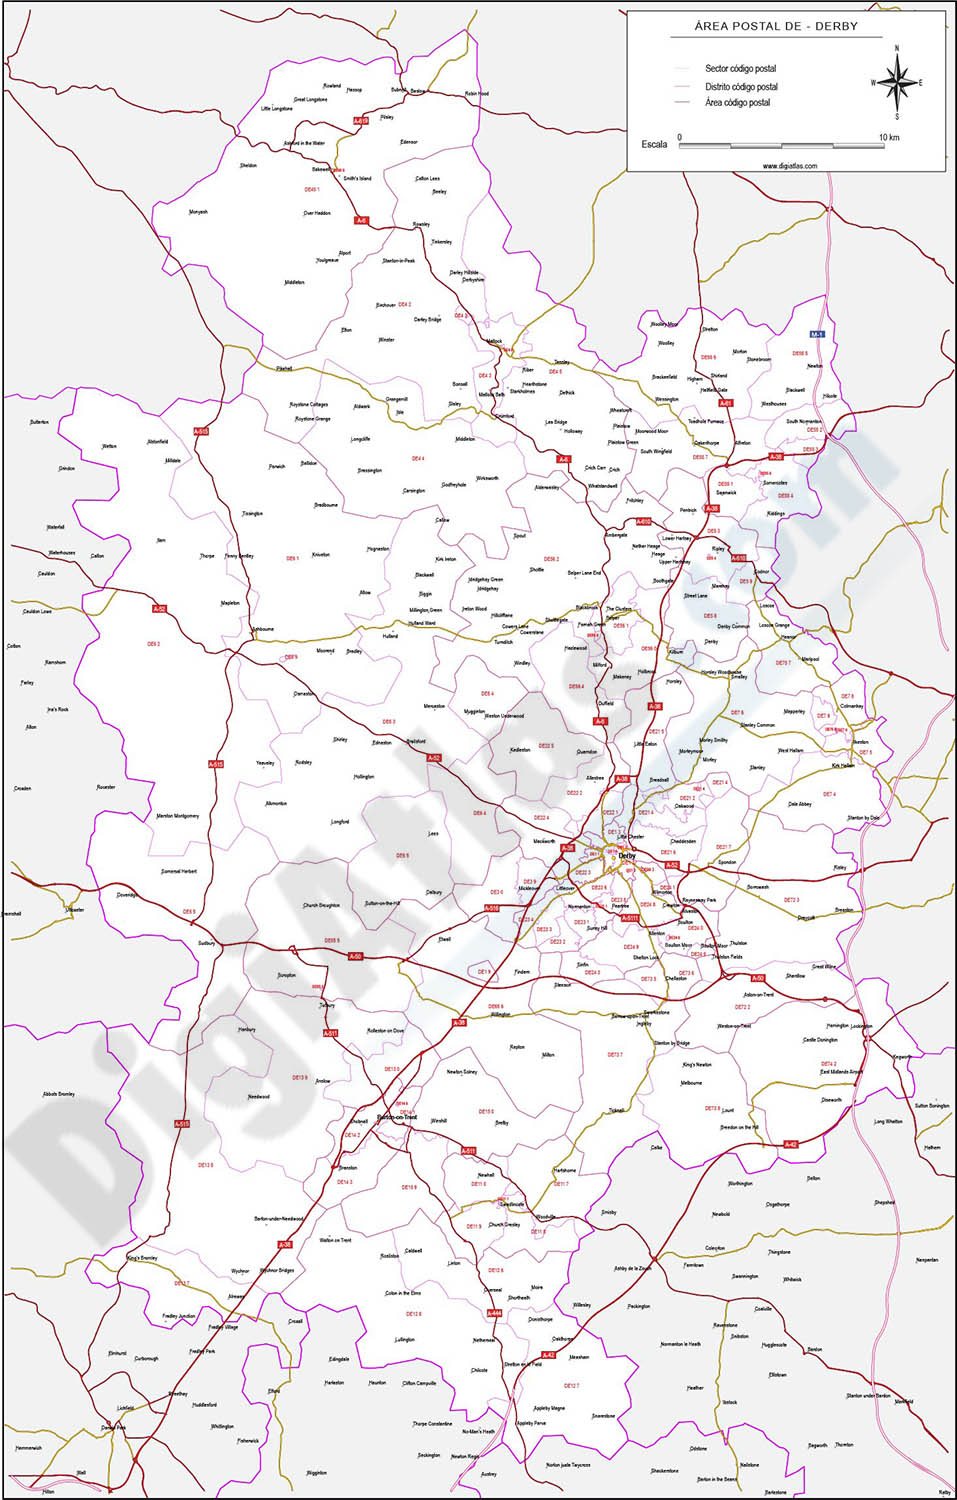 Derby - map of postcode area (de) with cities and major roads